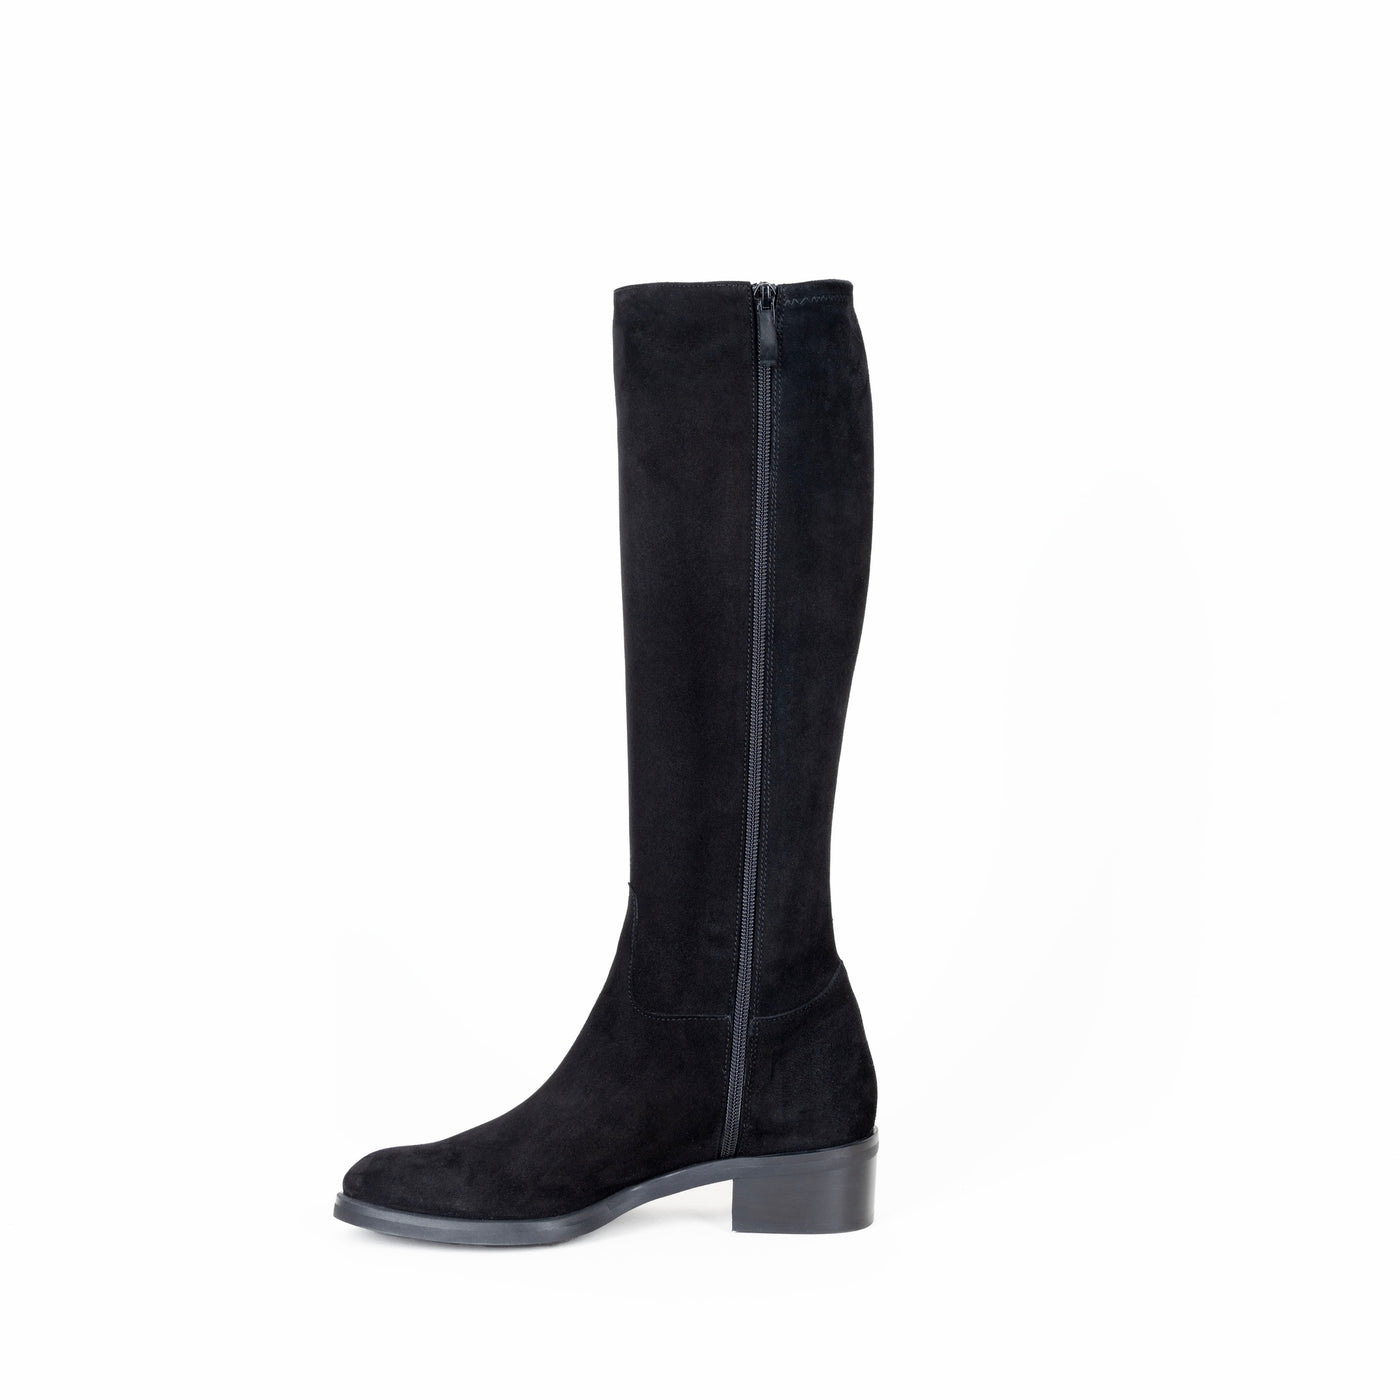 Black Suede Stretch Knee-High Boots